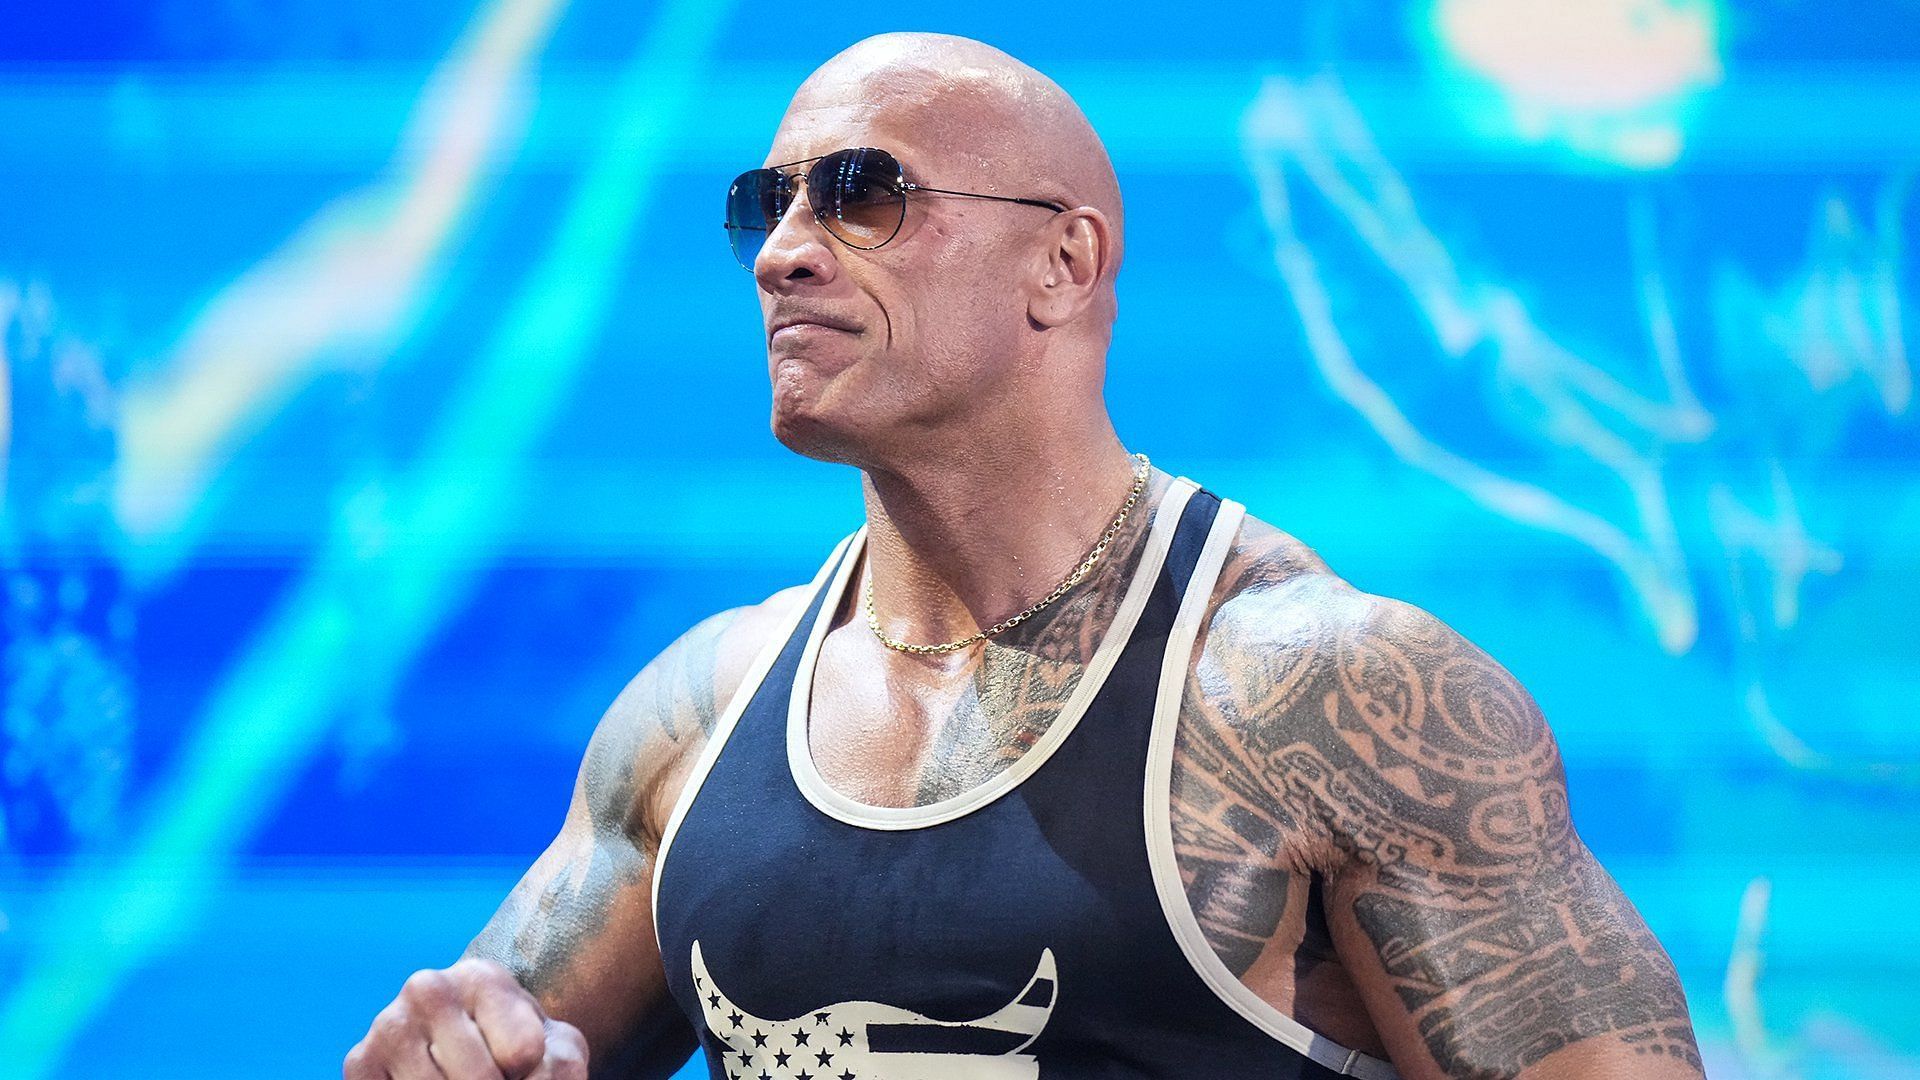 The Rock is not the best loved star in WWE right now